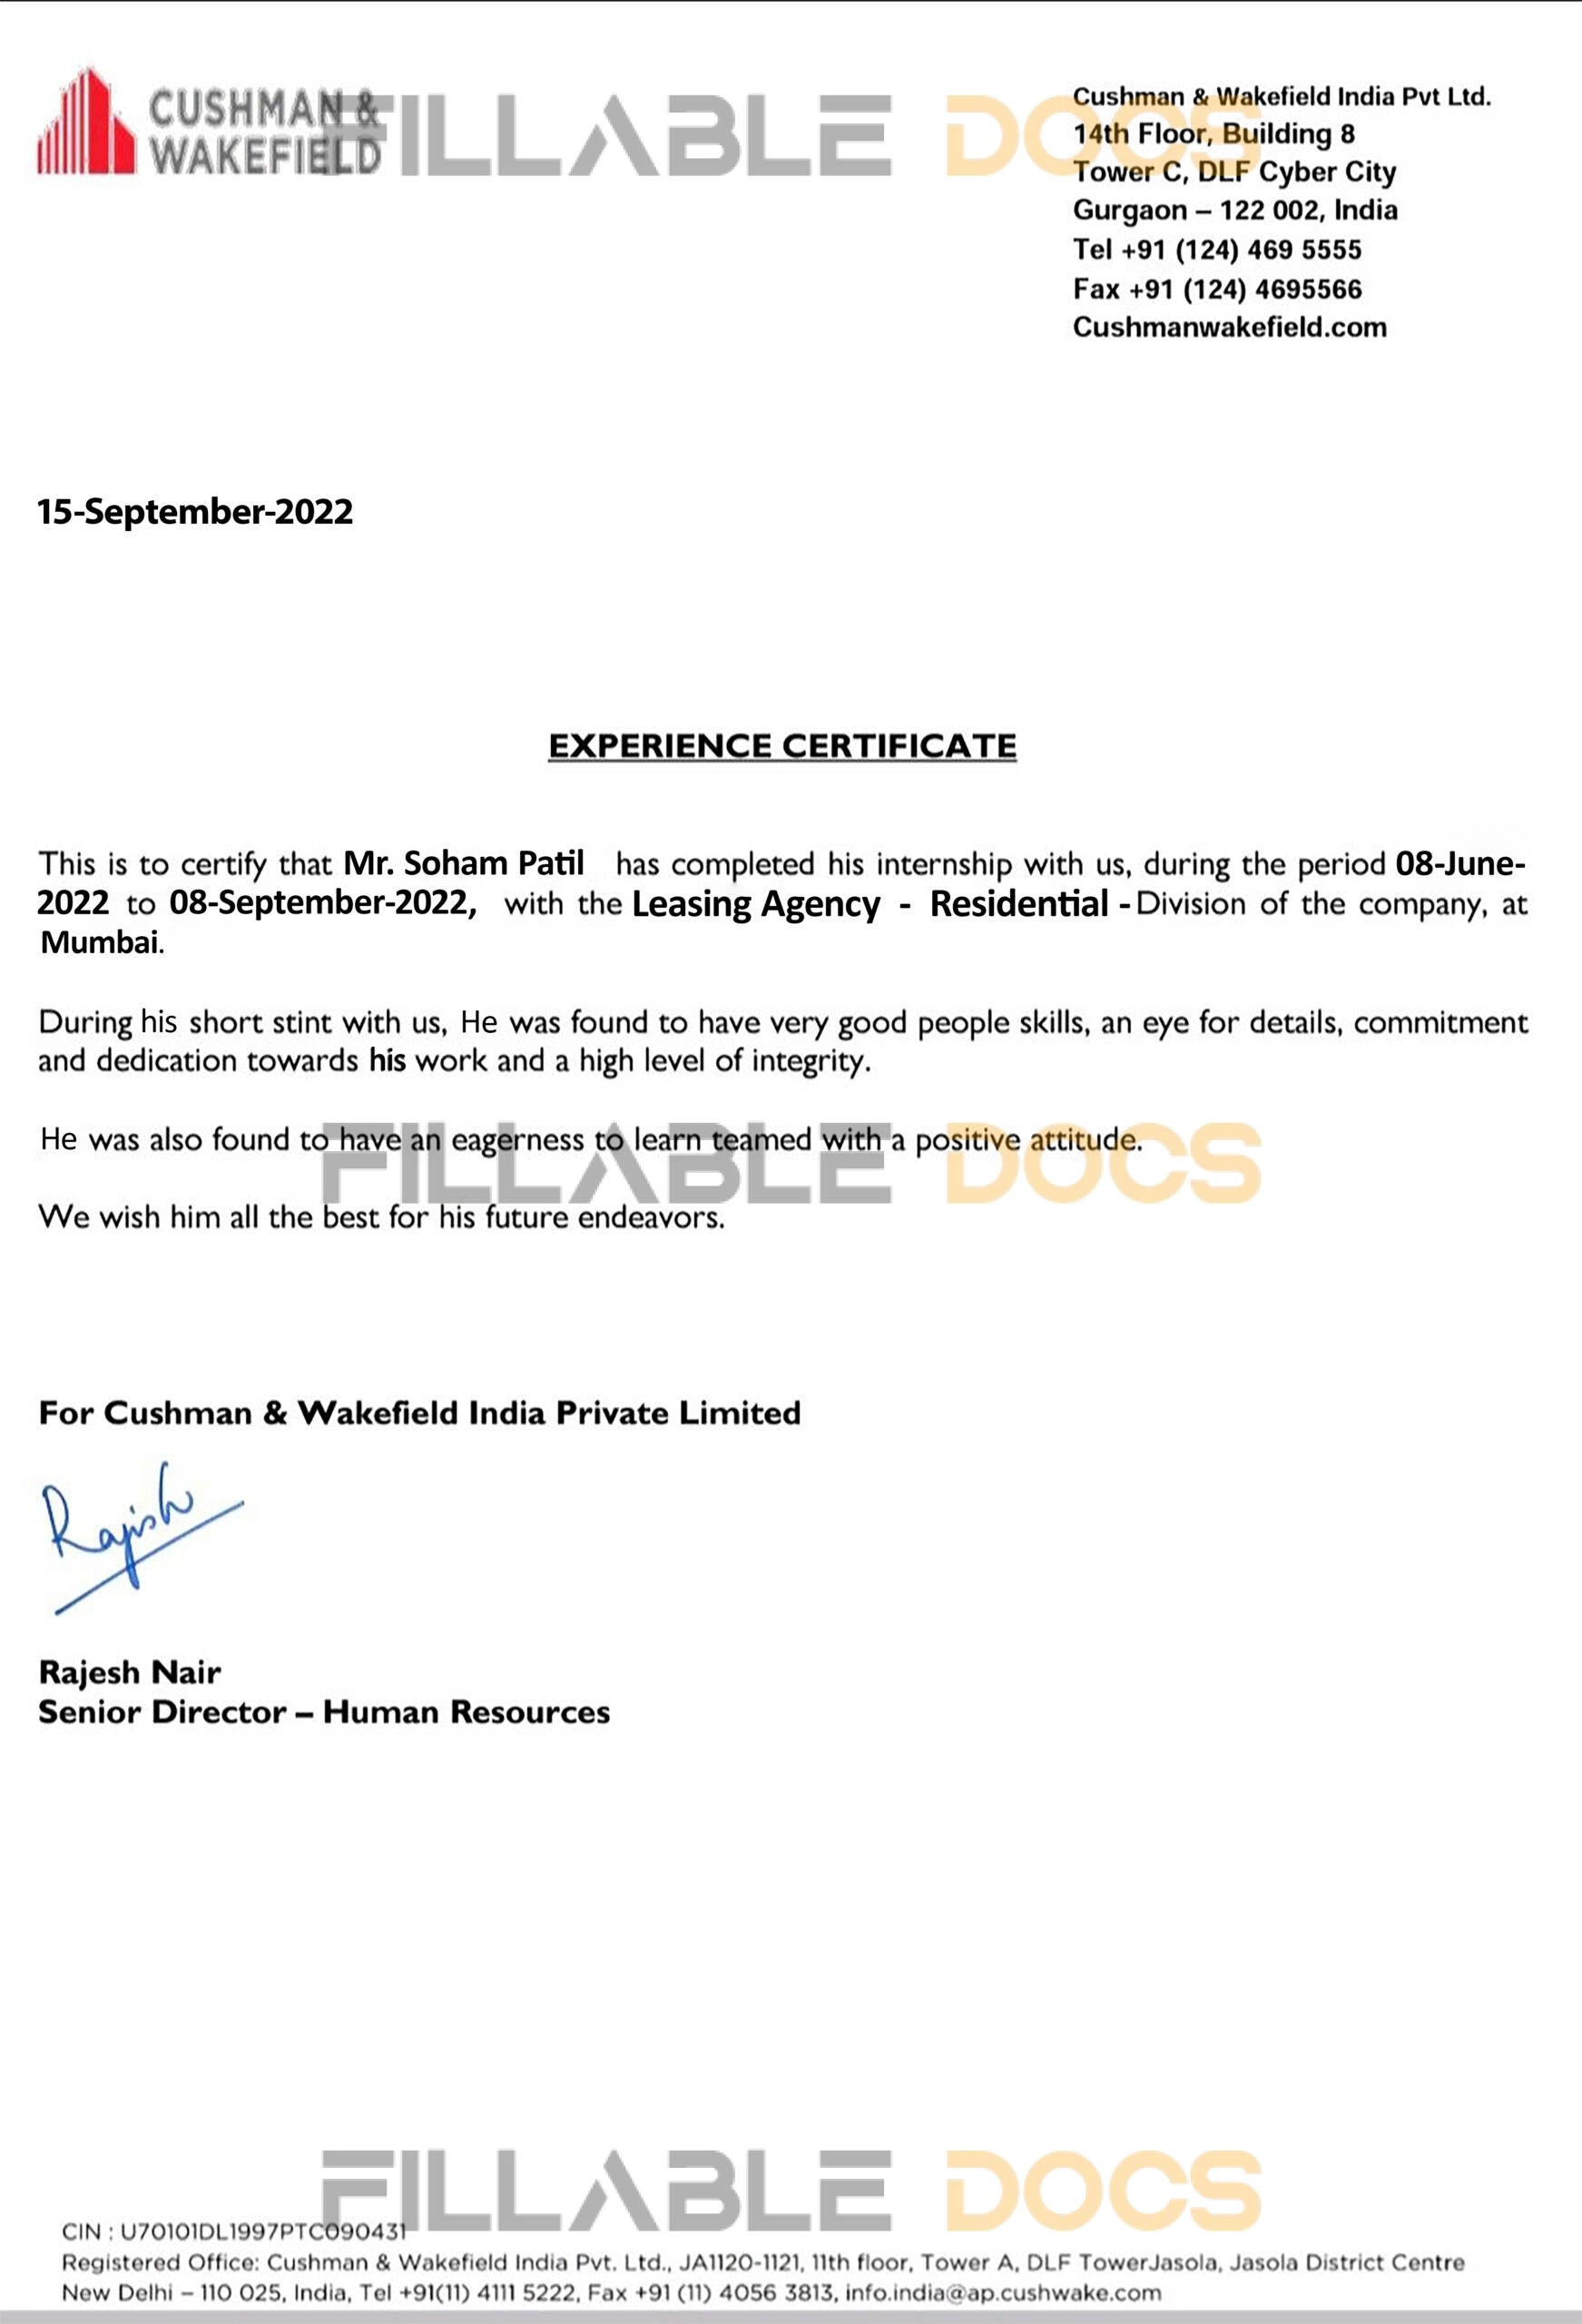 Purchase Realistic Fake cushman & wakefield company Experience Certificate Templates | Easily Editable